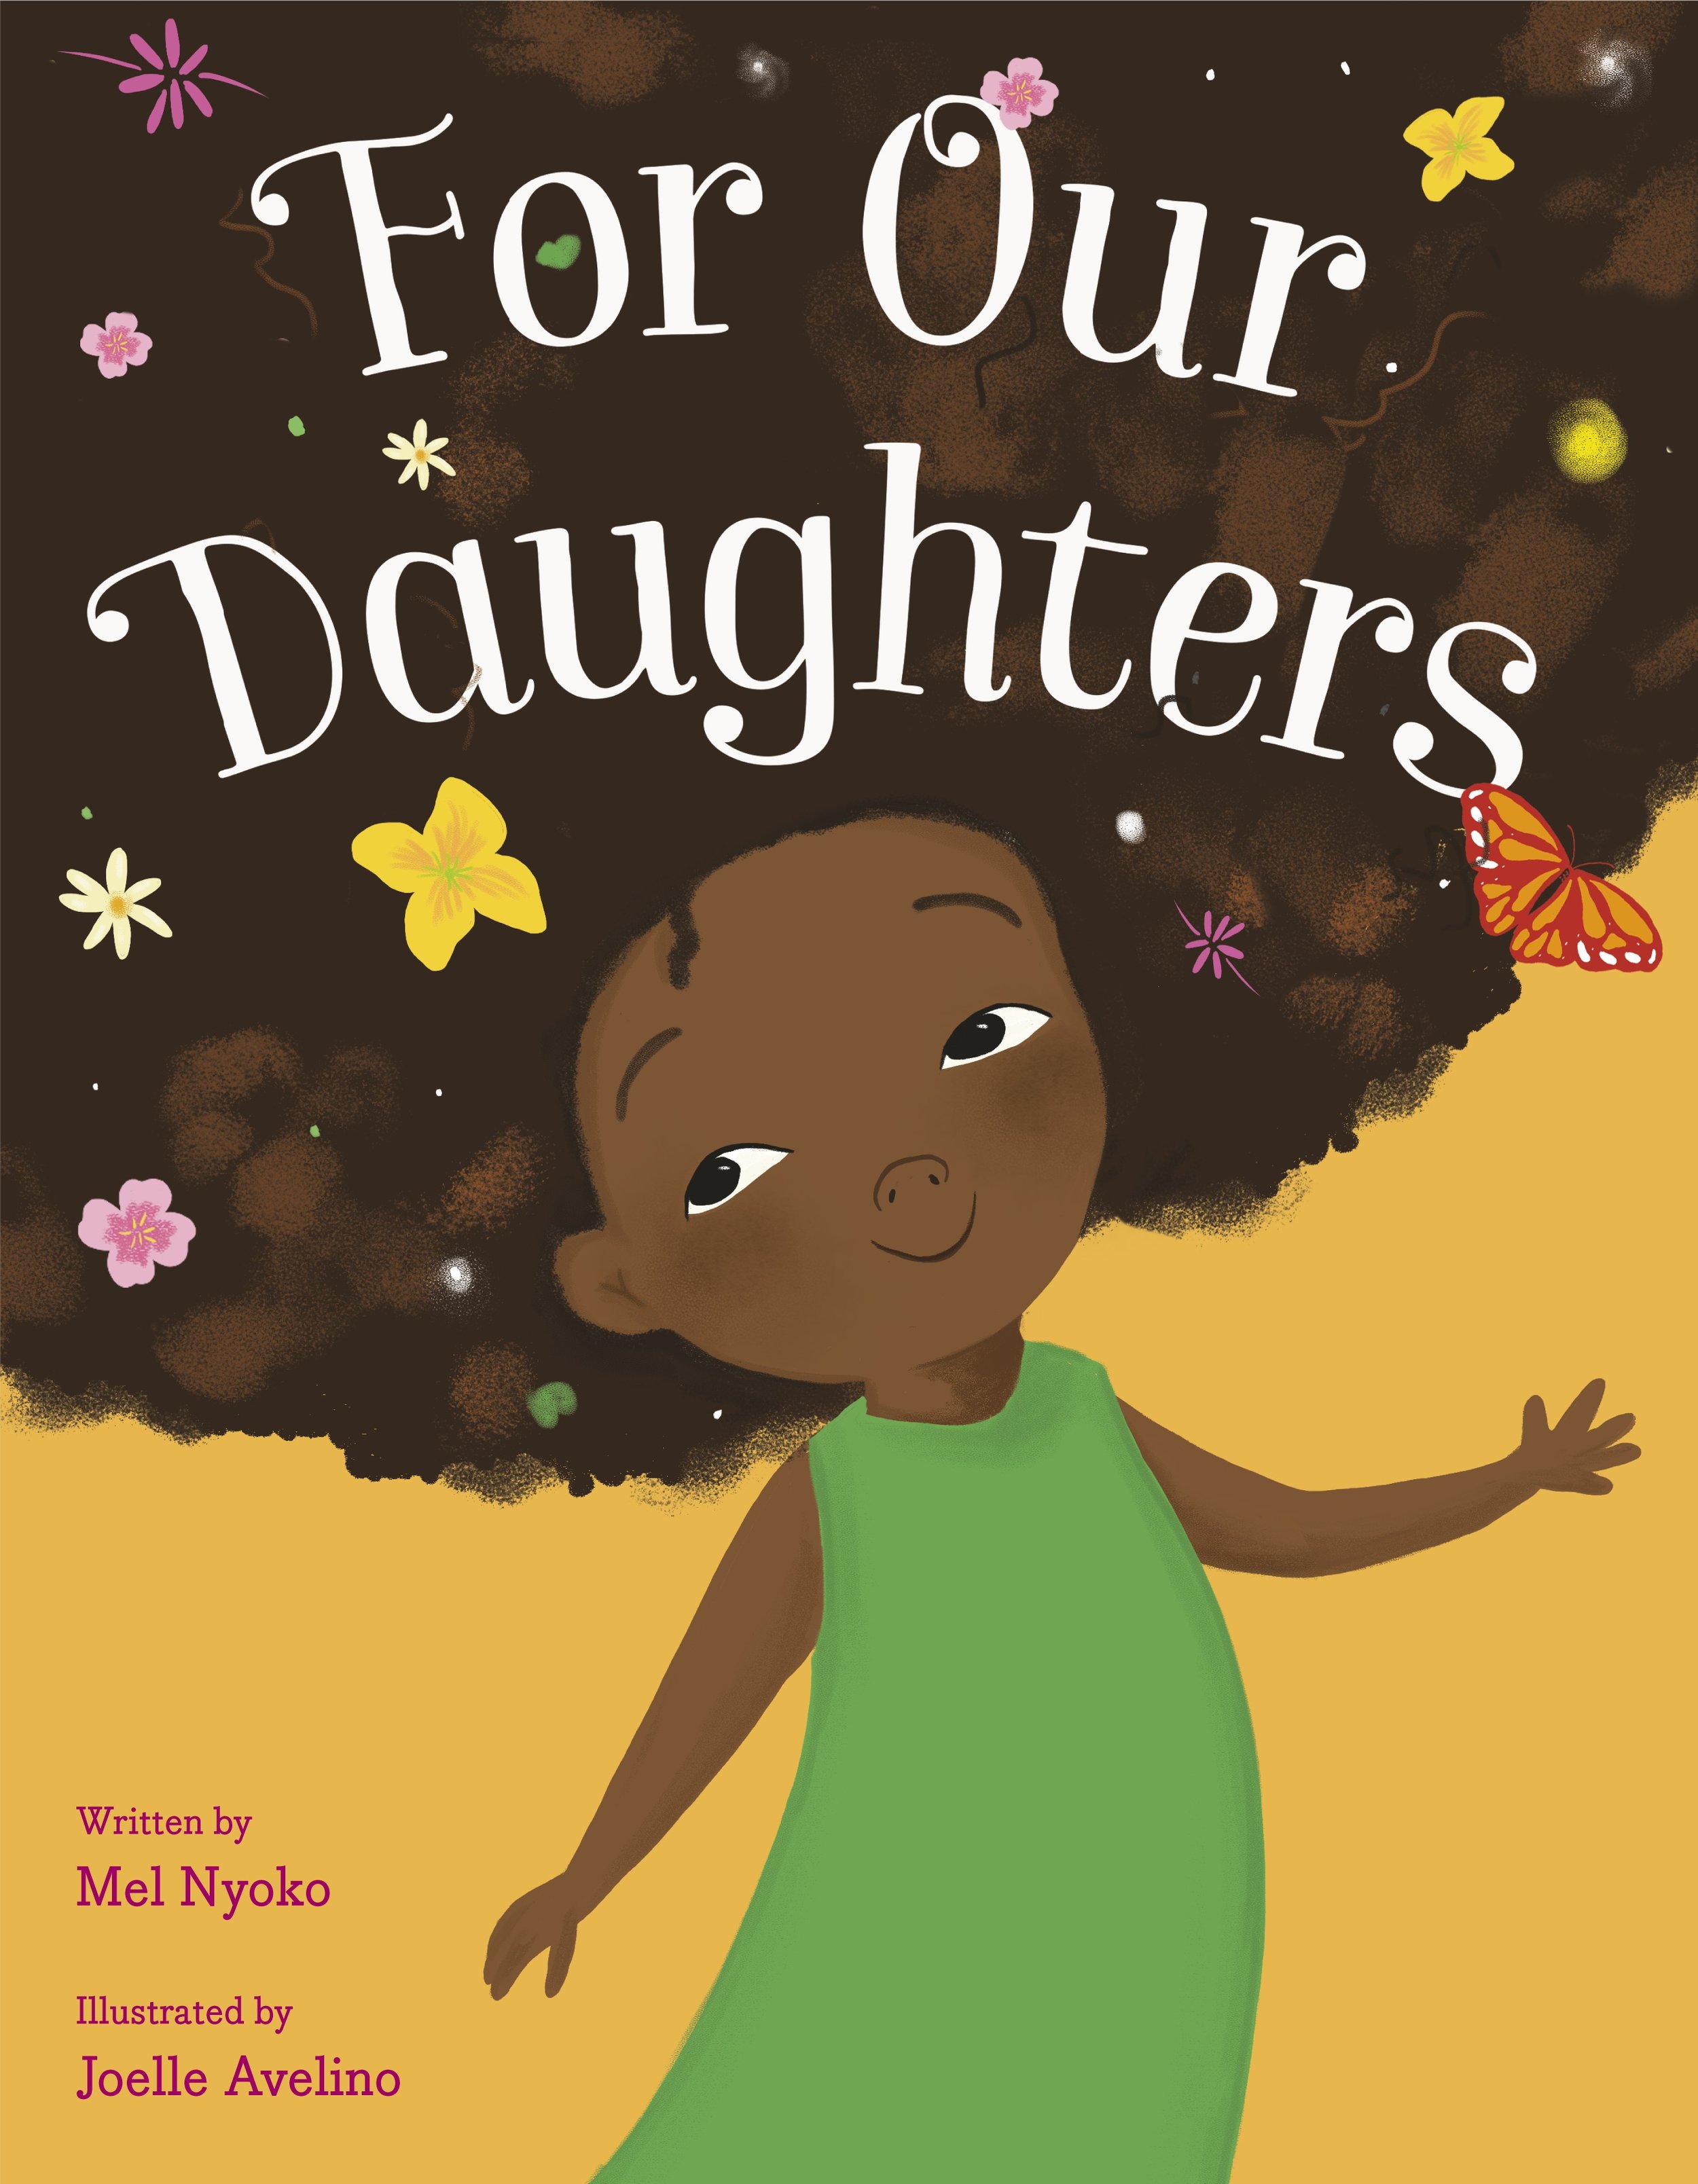   For Our Daughters                                                            This inspiring book gives girls permission to let their lights shine. They want all girls to know that there are no limits on what they can achieve.  Publisher:  Random Ho